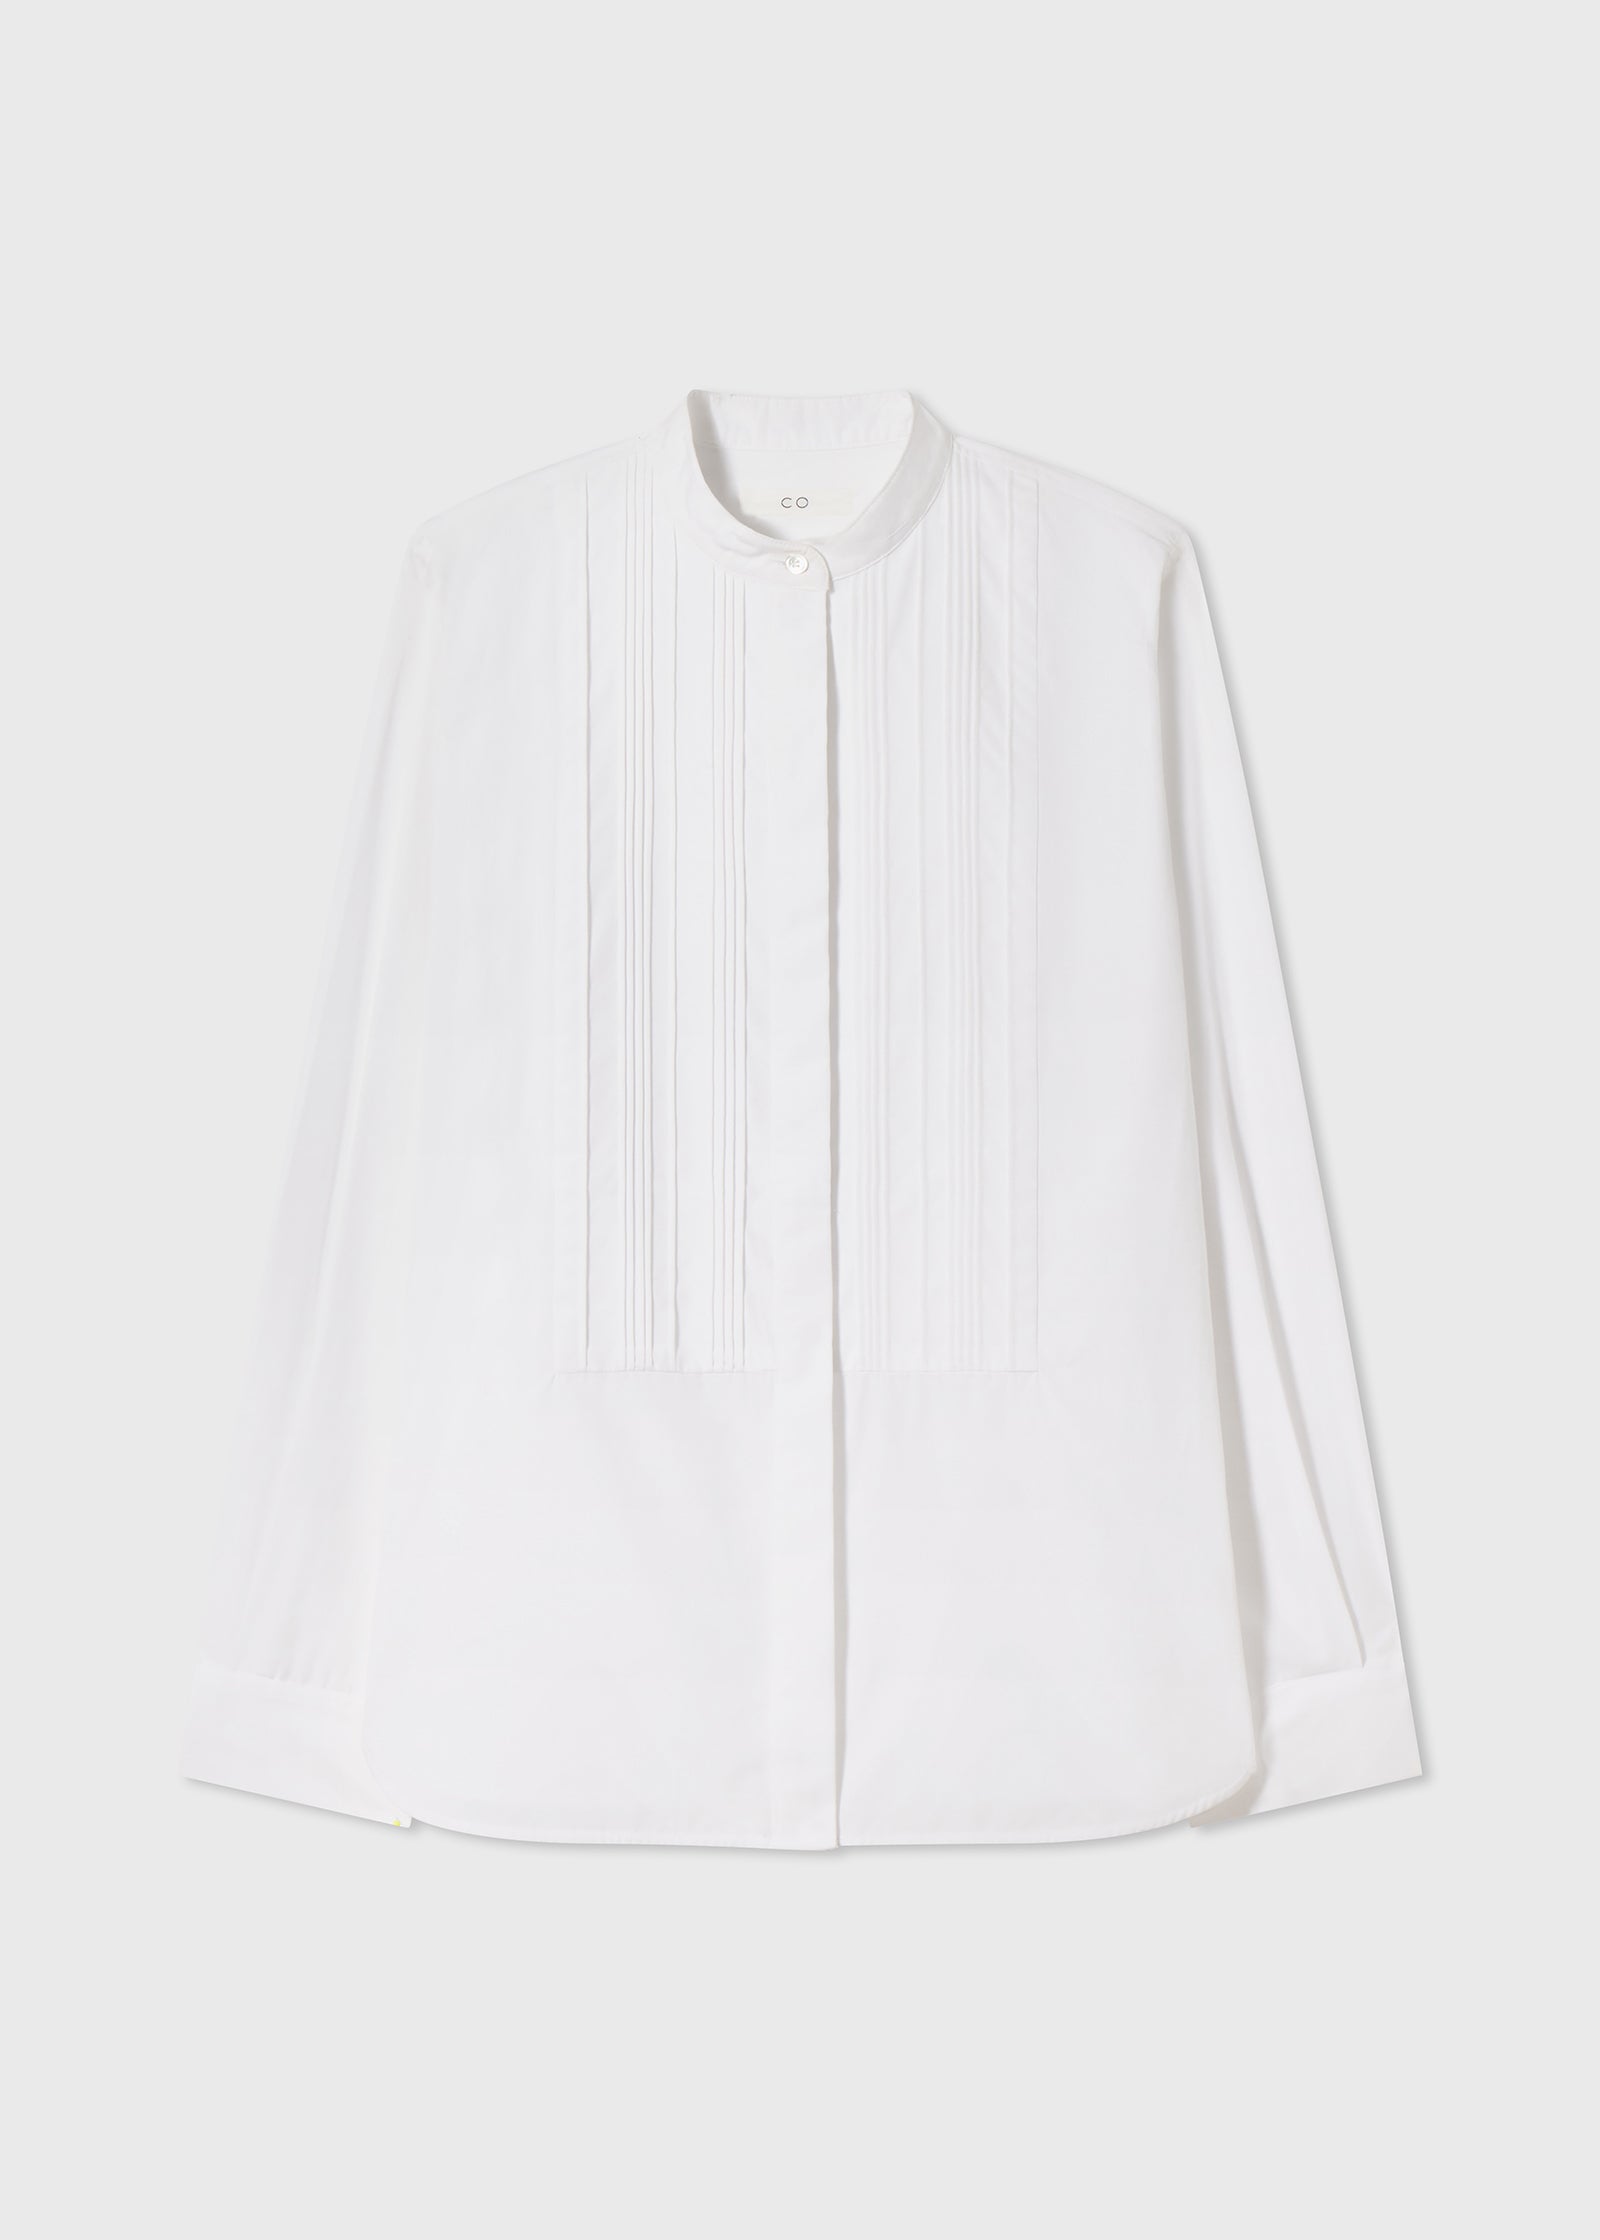 Bib Front Tuxedo Shirt in Cotton - White - CO Collections